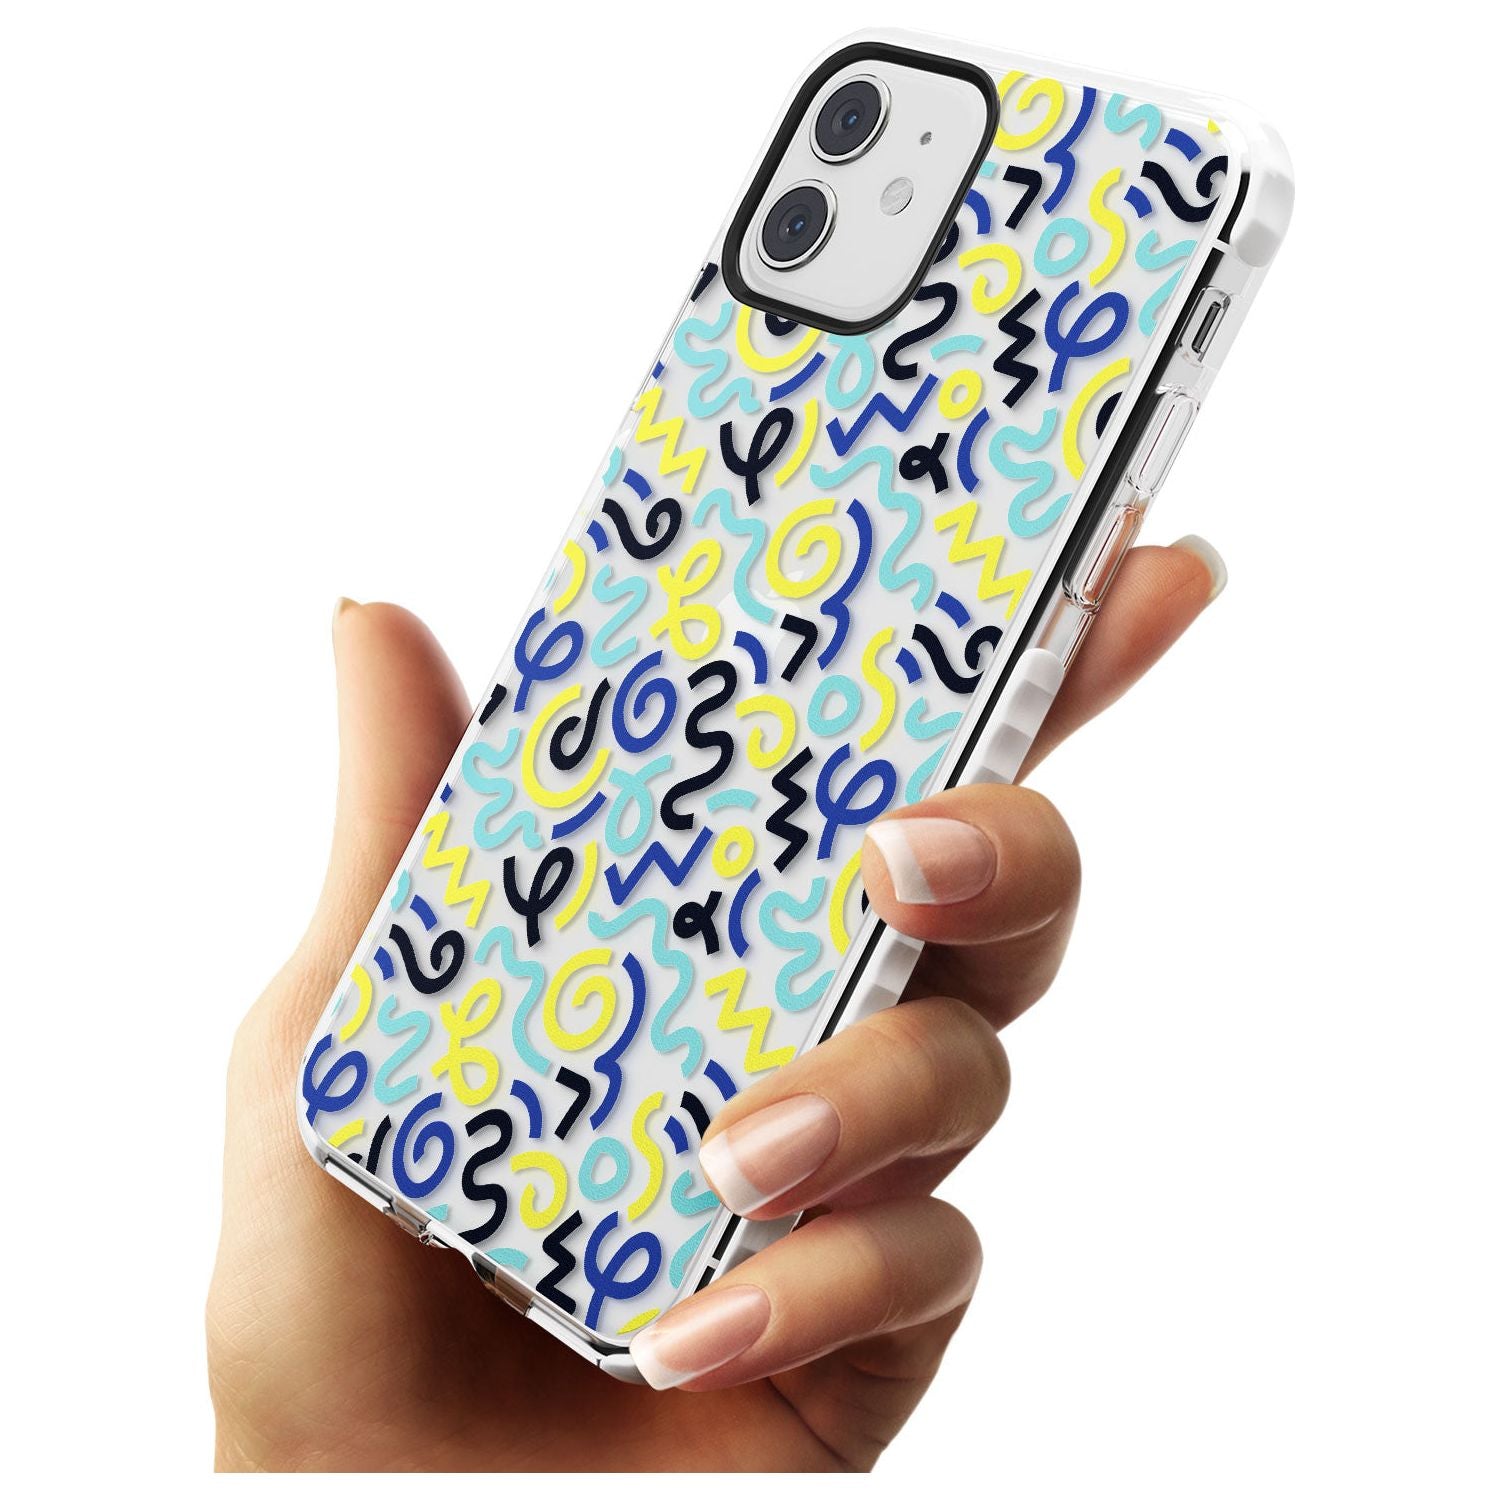 Blue & Yellow Shapes Memphis Retro Pattern Design Impact Phone Case for iPhone 11